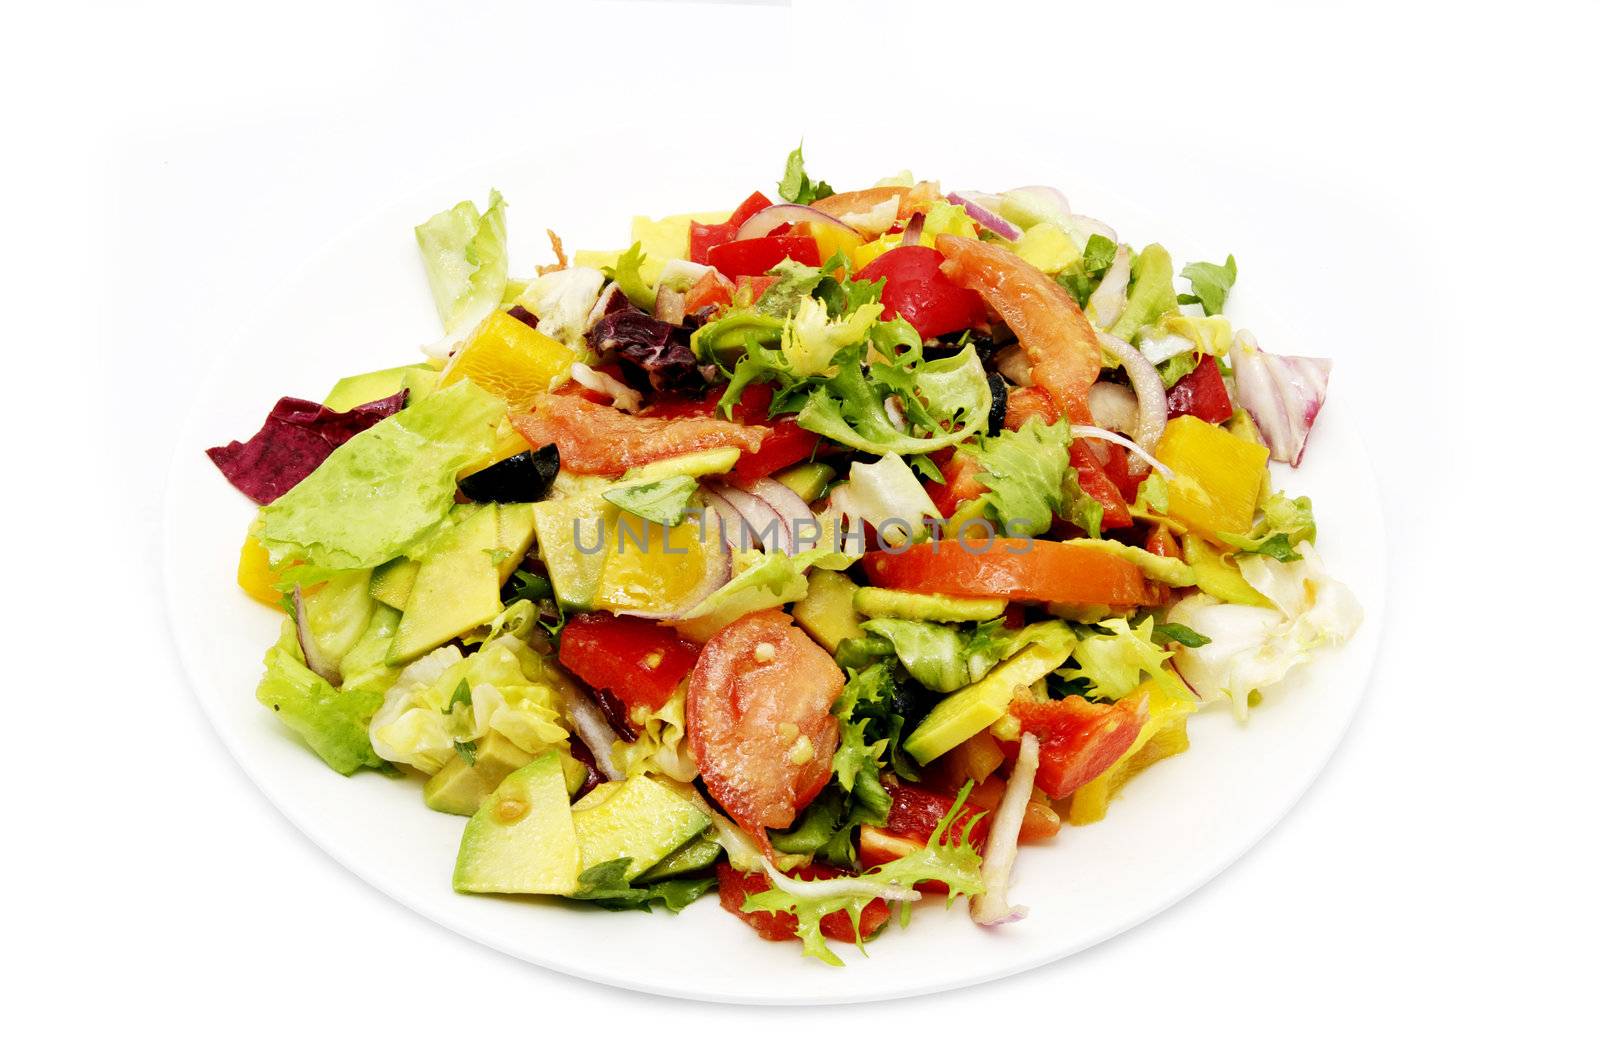 plate of salad vegetables on white background